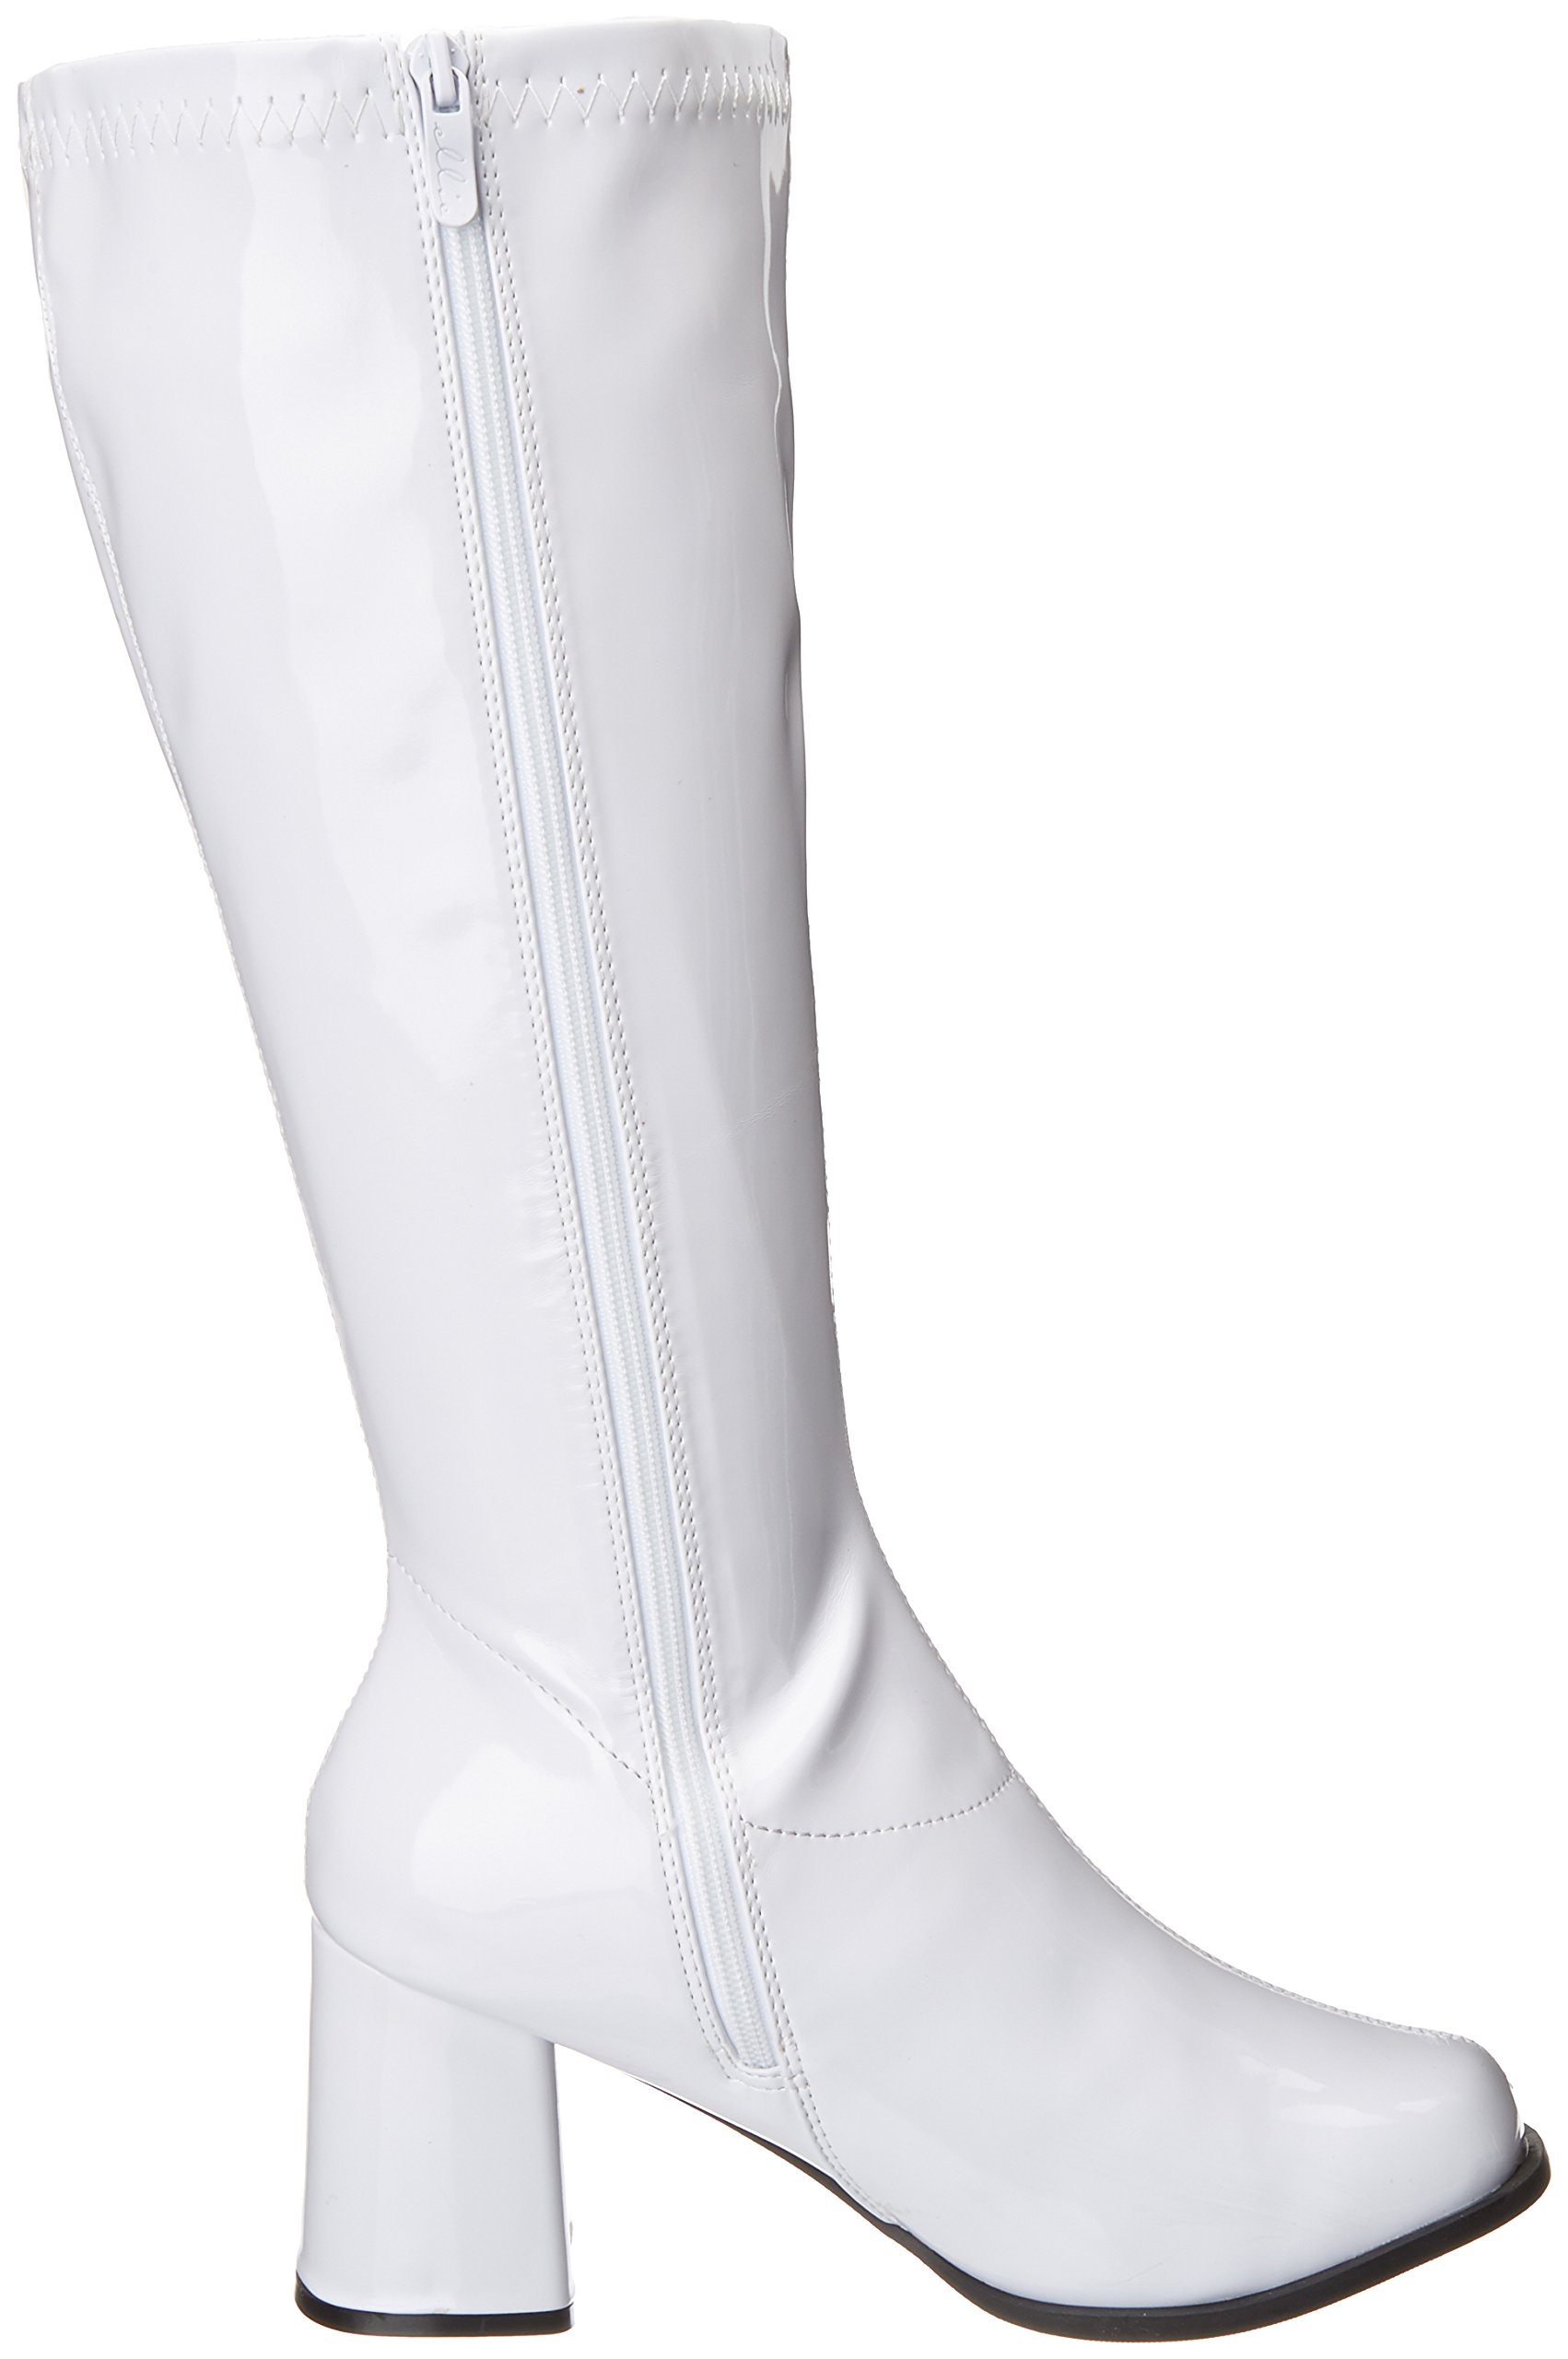 Ellie Shoes Women's Knee High Boot